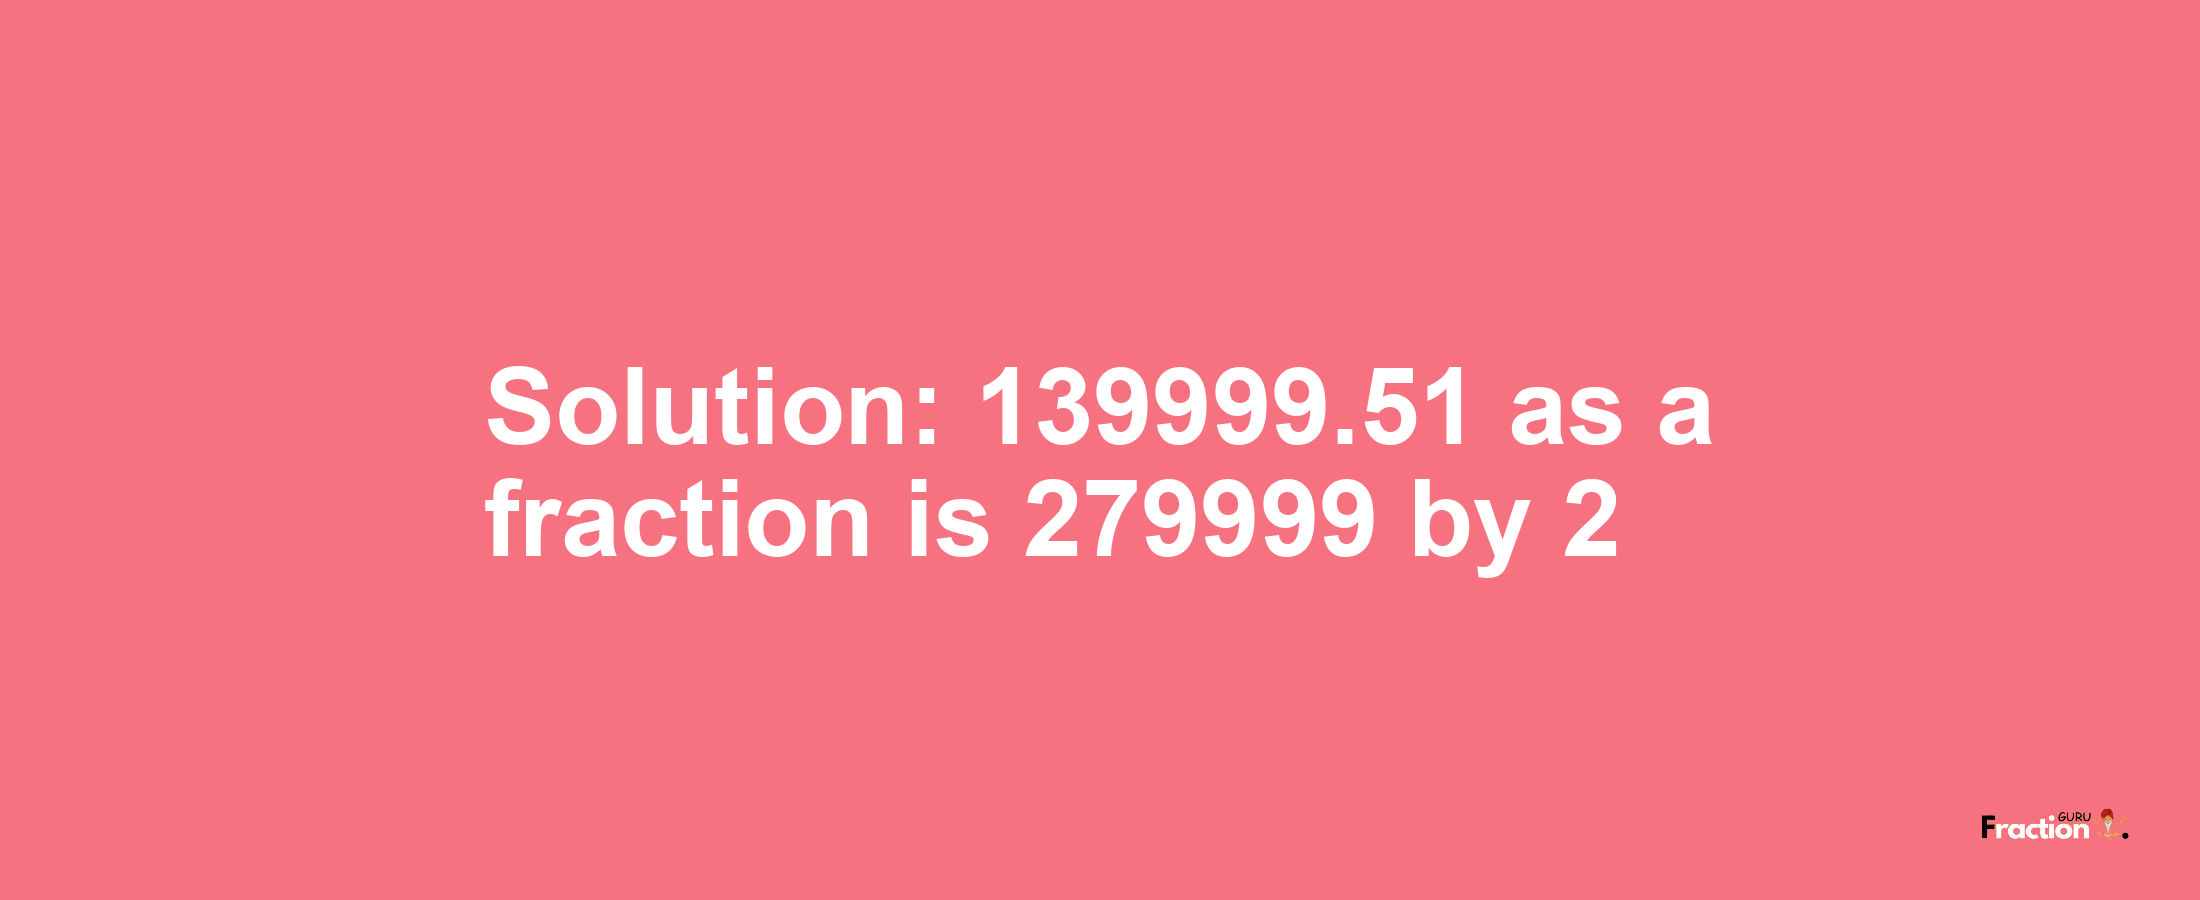 Solution:139999.51 as a fraction is 279999/2